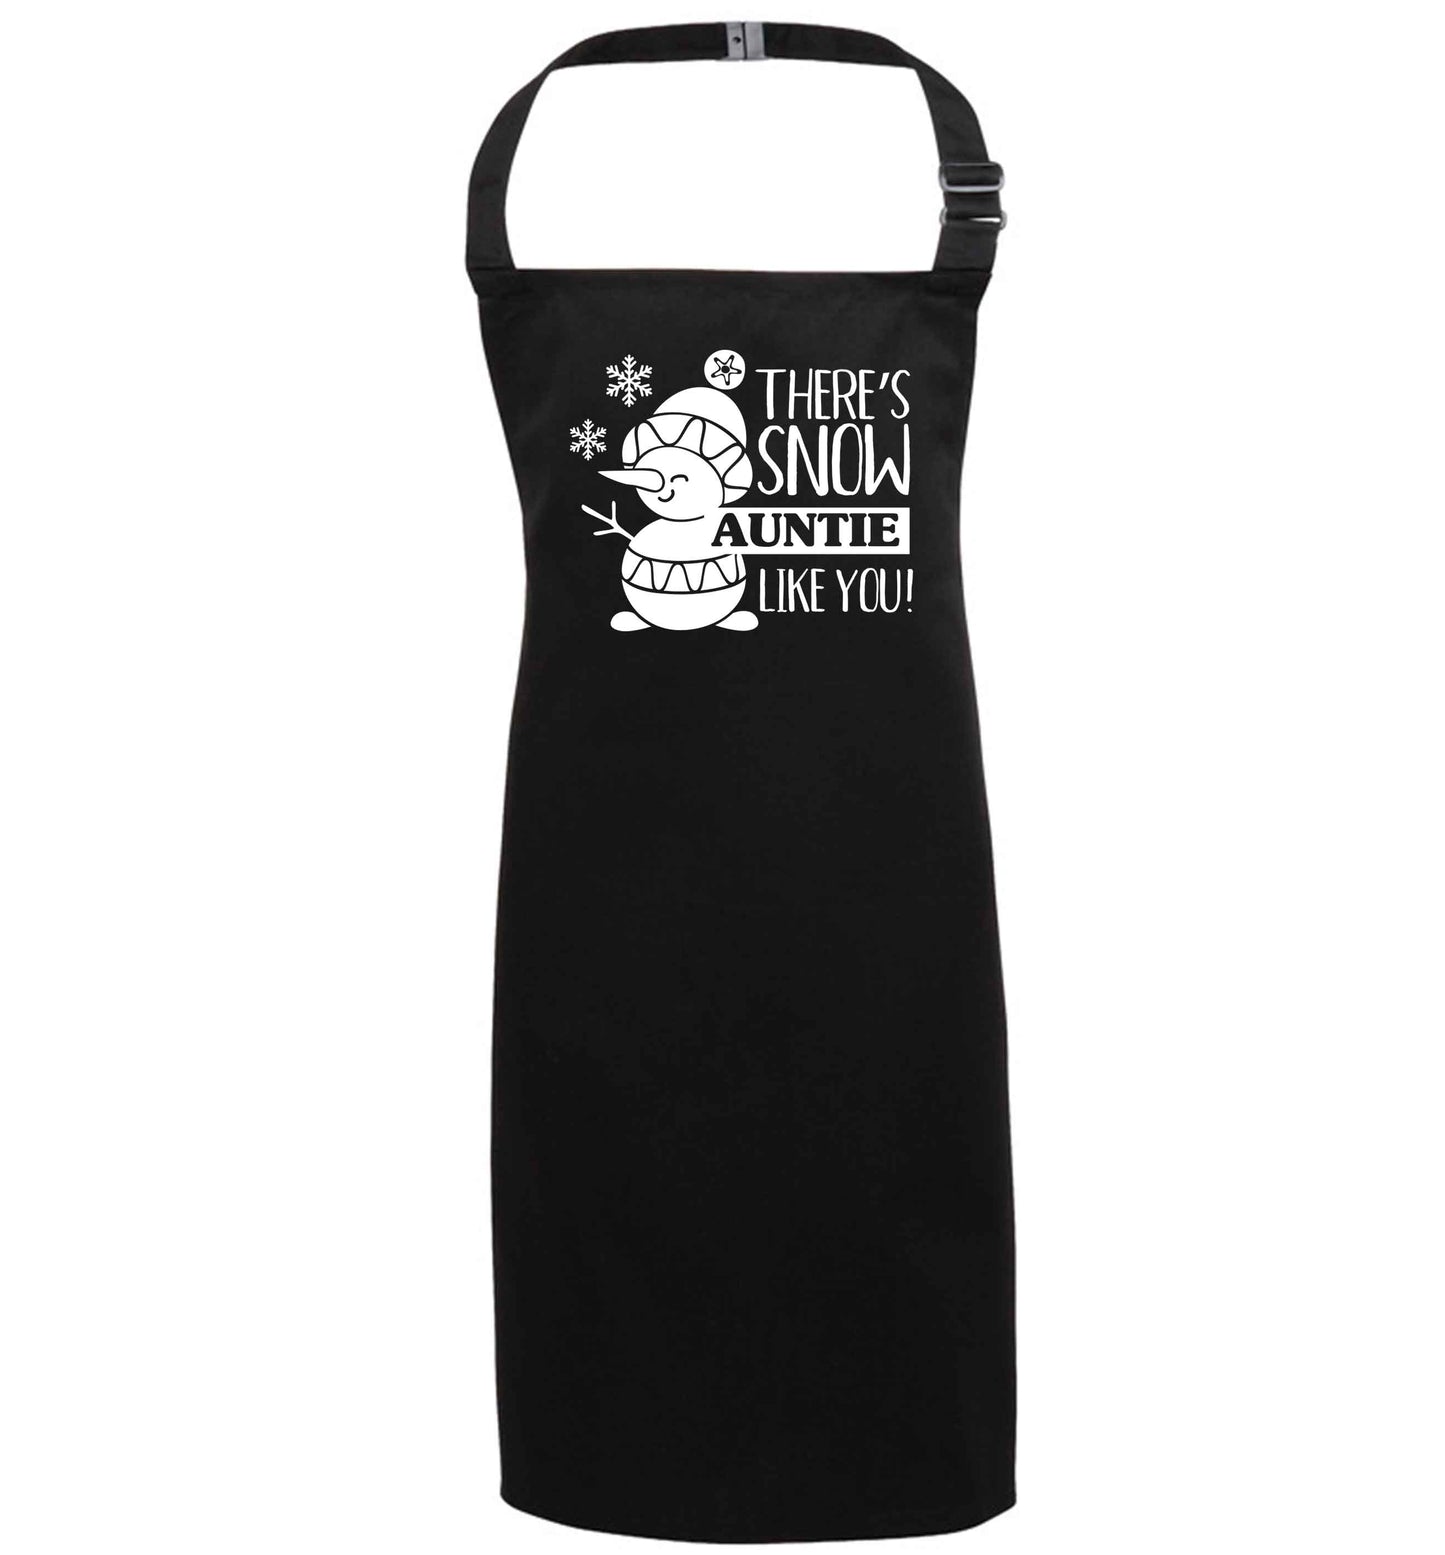 There's snow auntie like you black apron 7-10 years